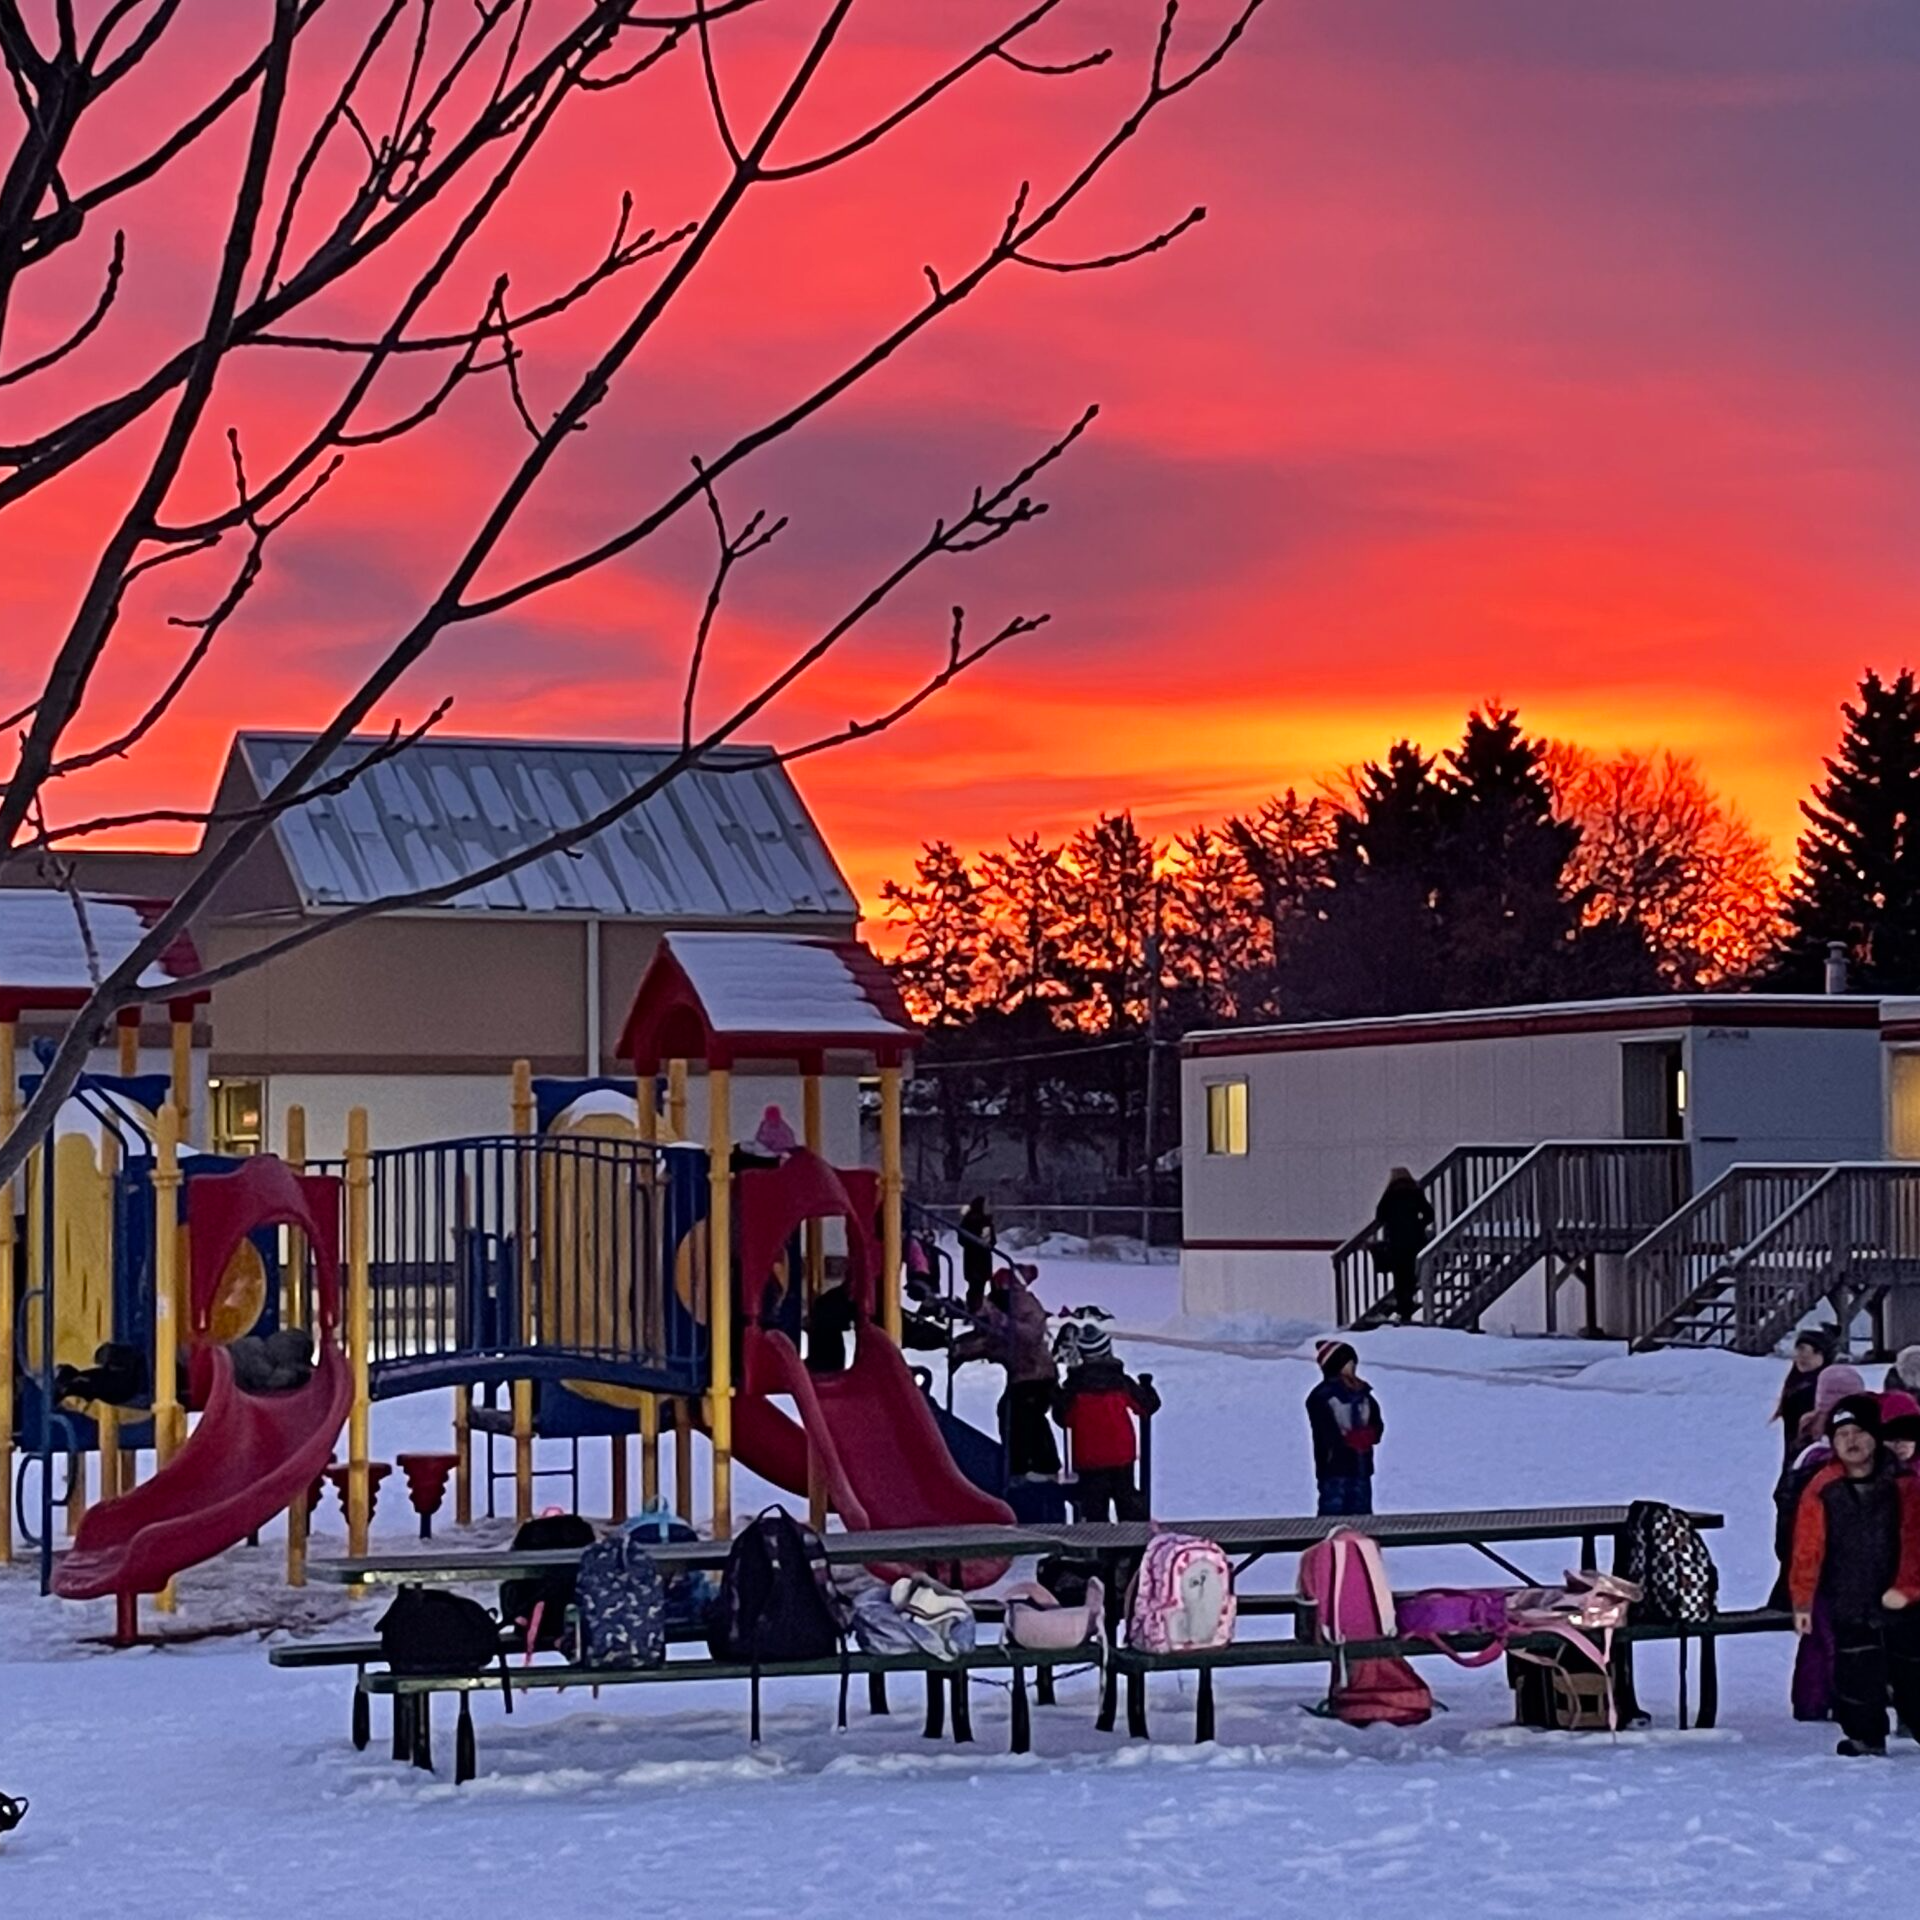 kids in playground with sunset in background